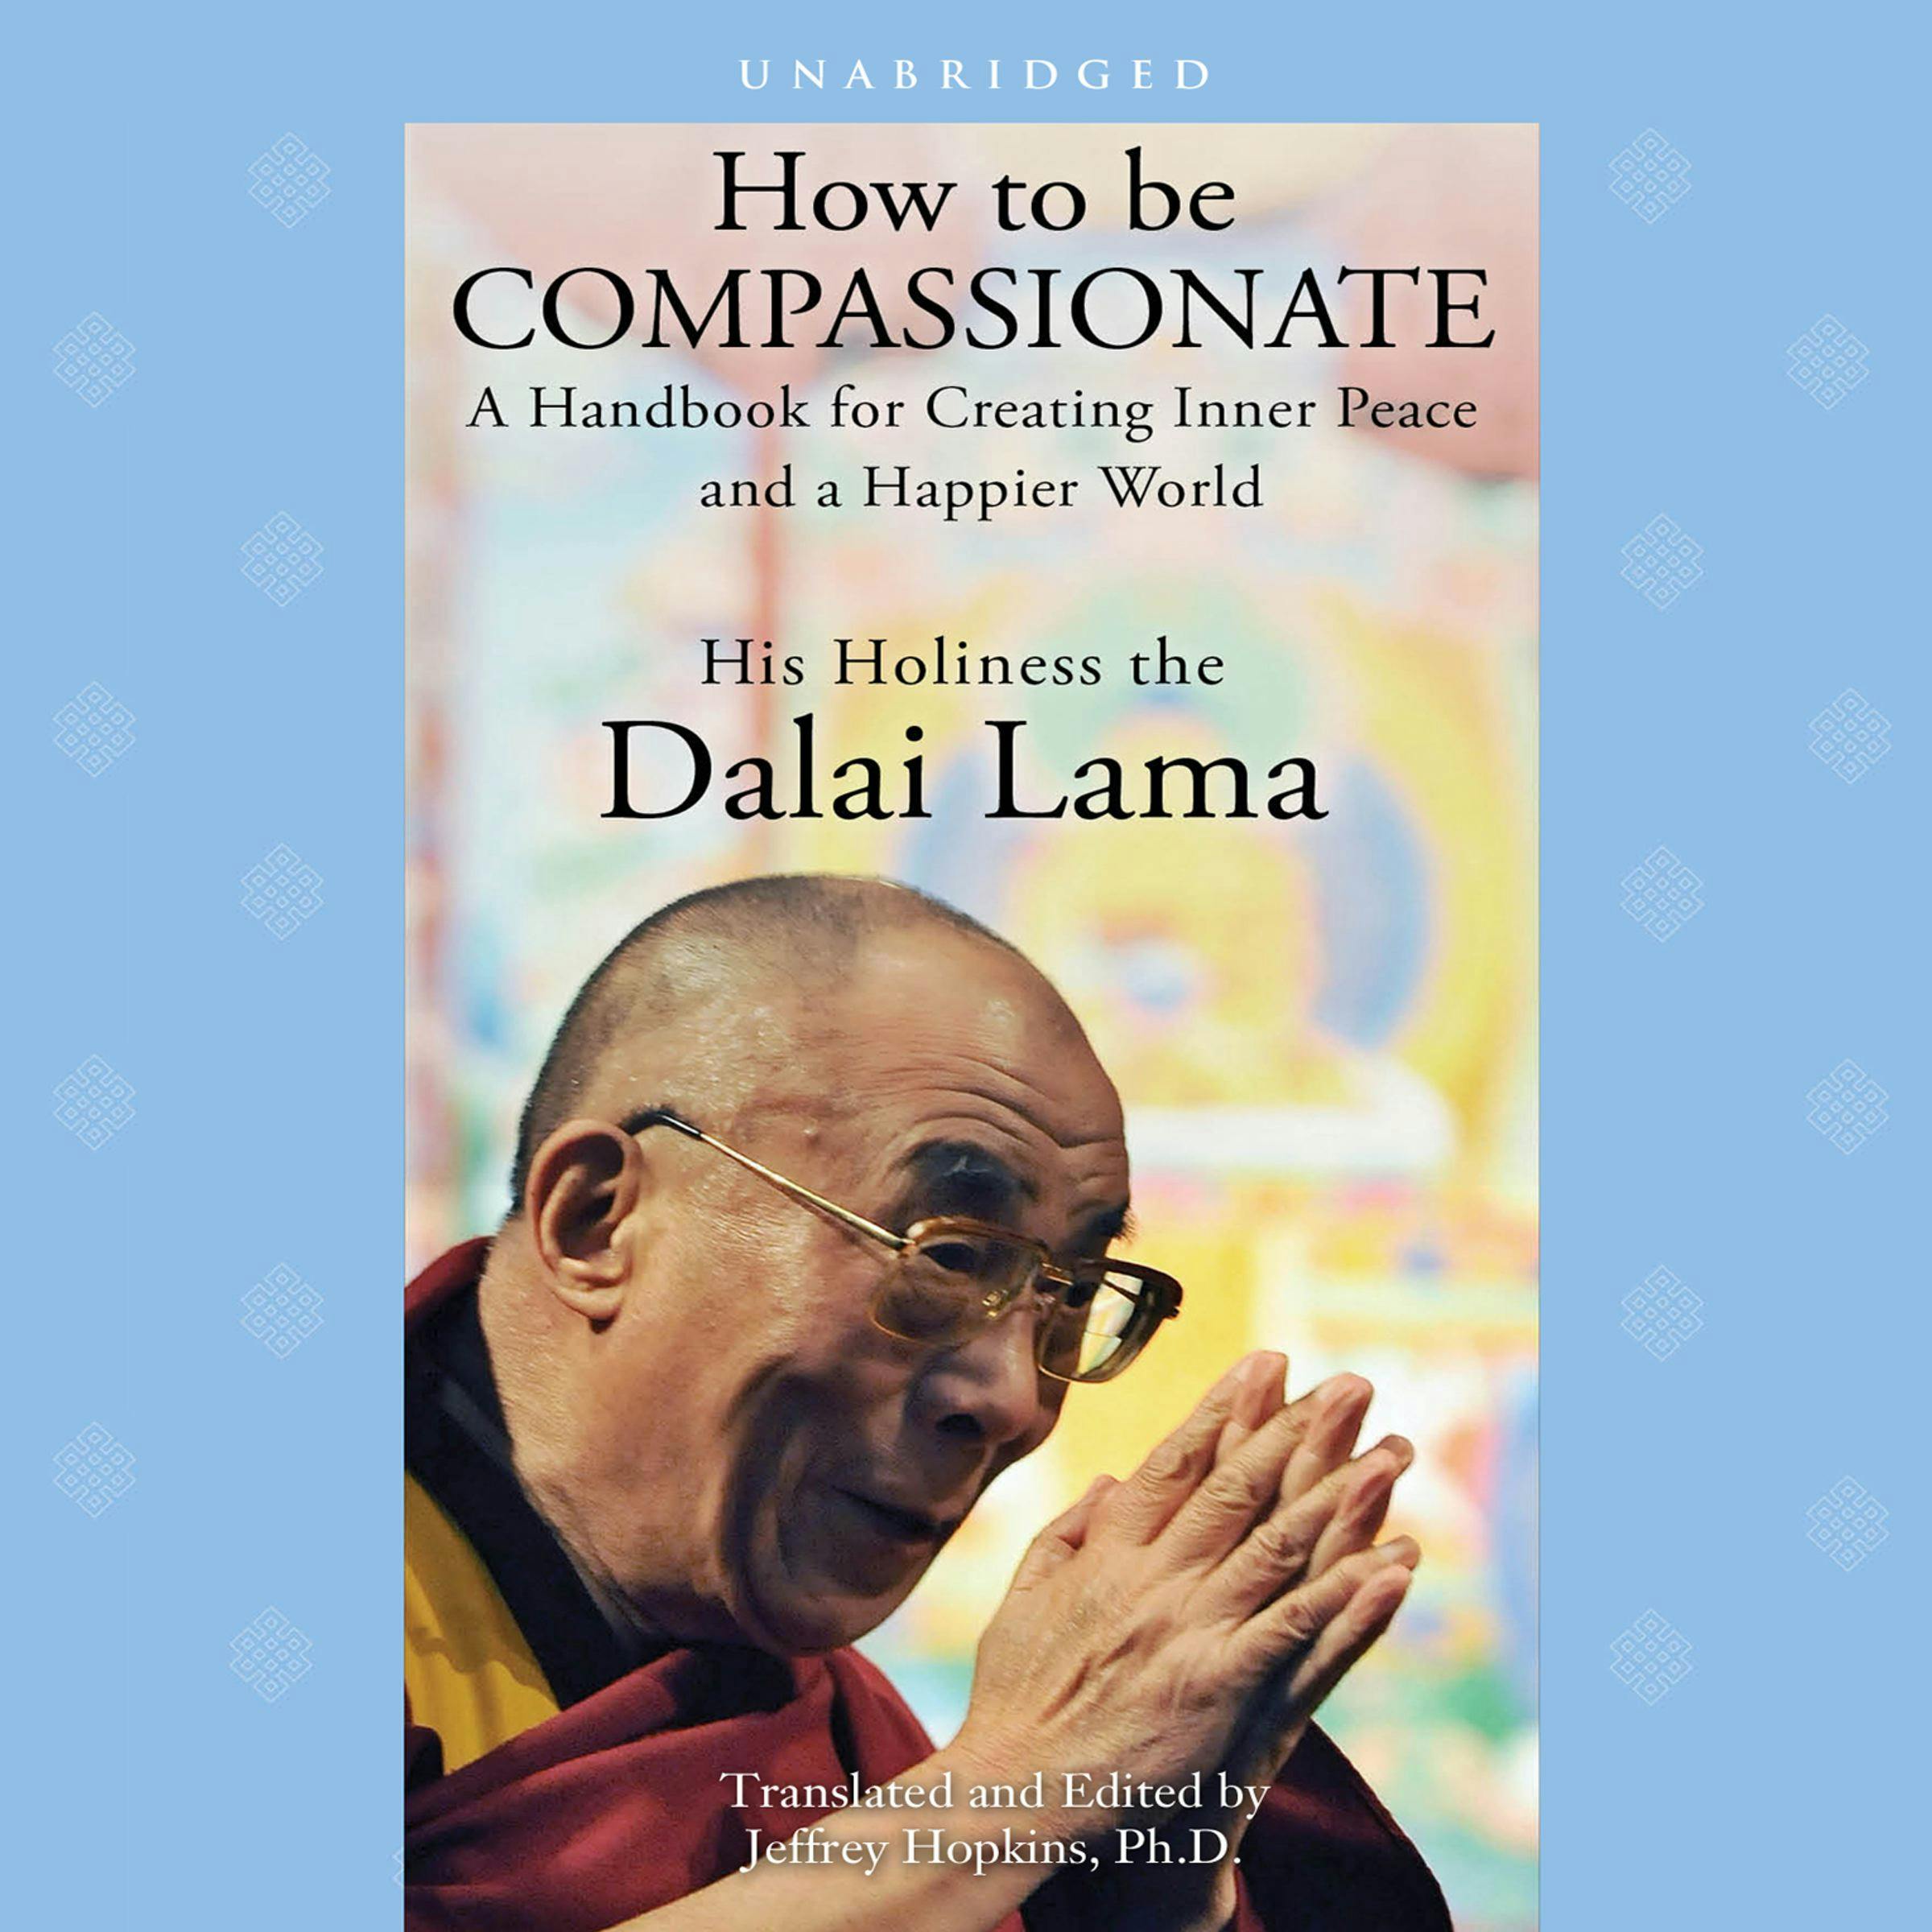 How to Be Compassionate - His Holiness the Dalai Lama